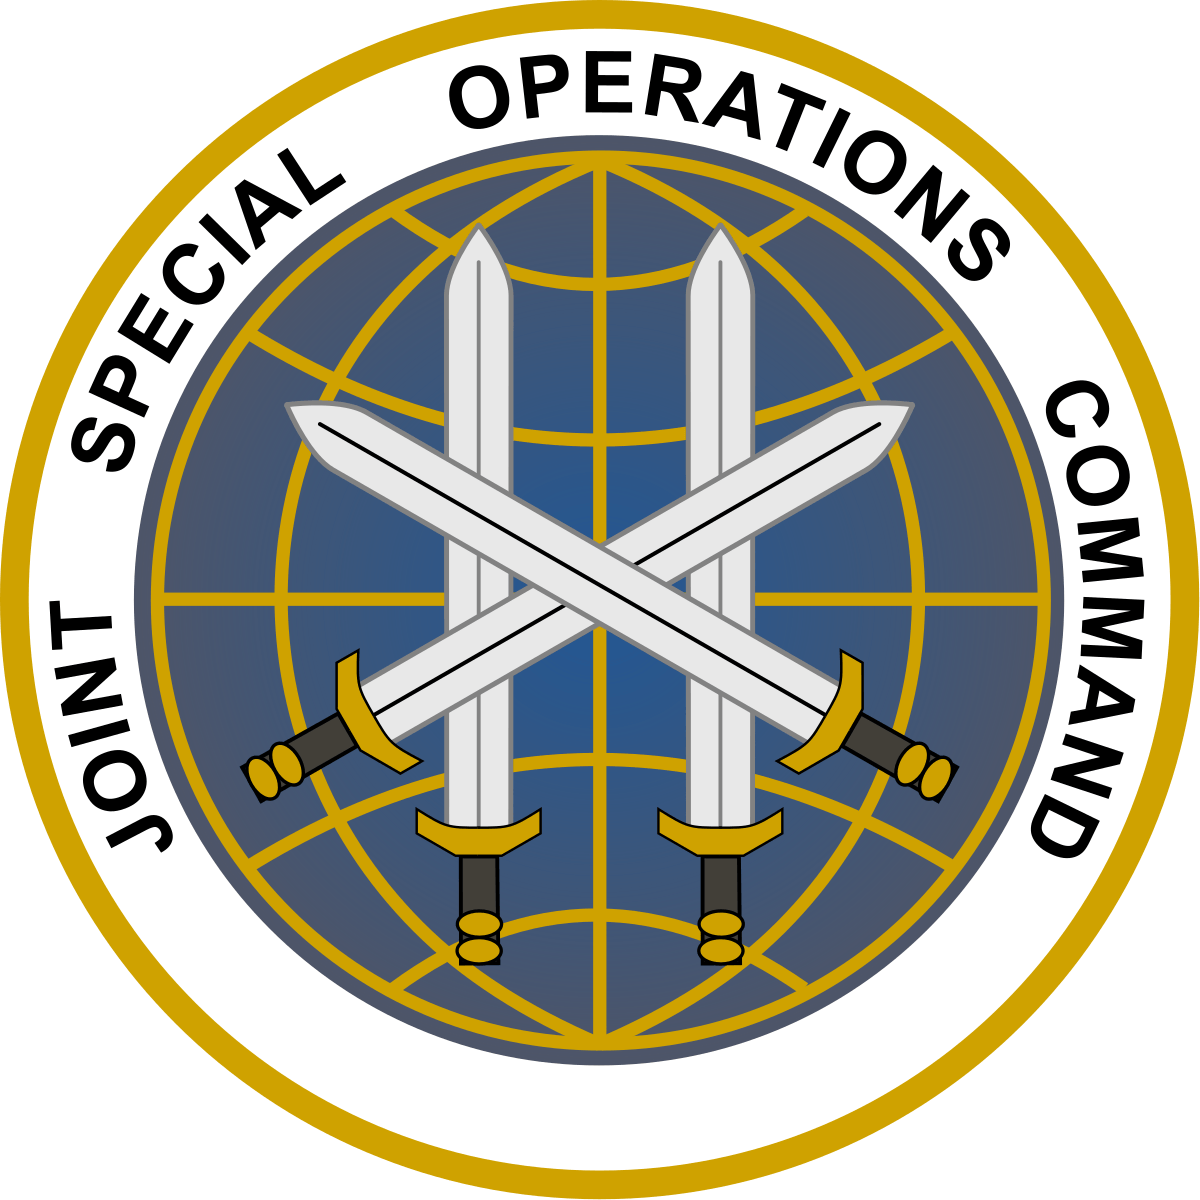 Socom Logo - Joint Special Operations Command